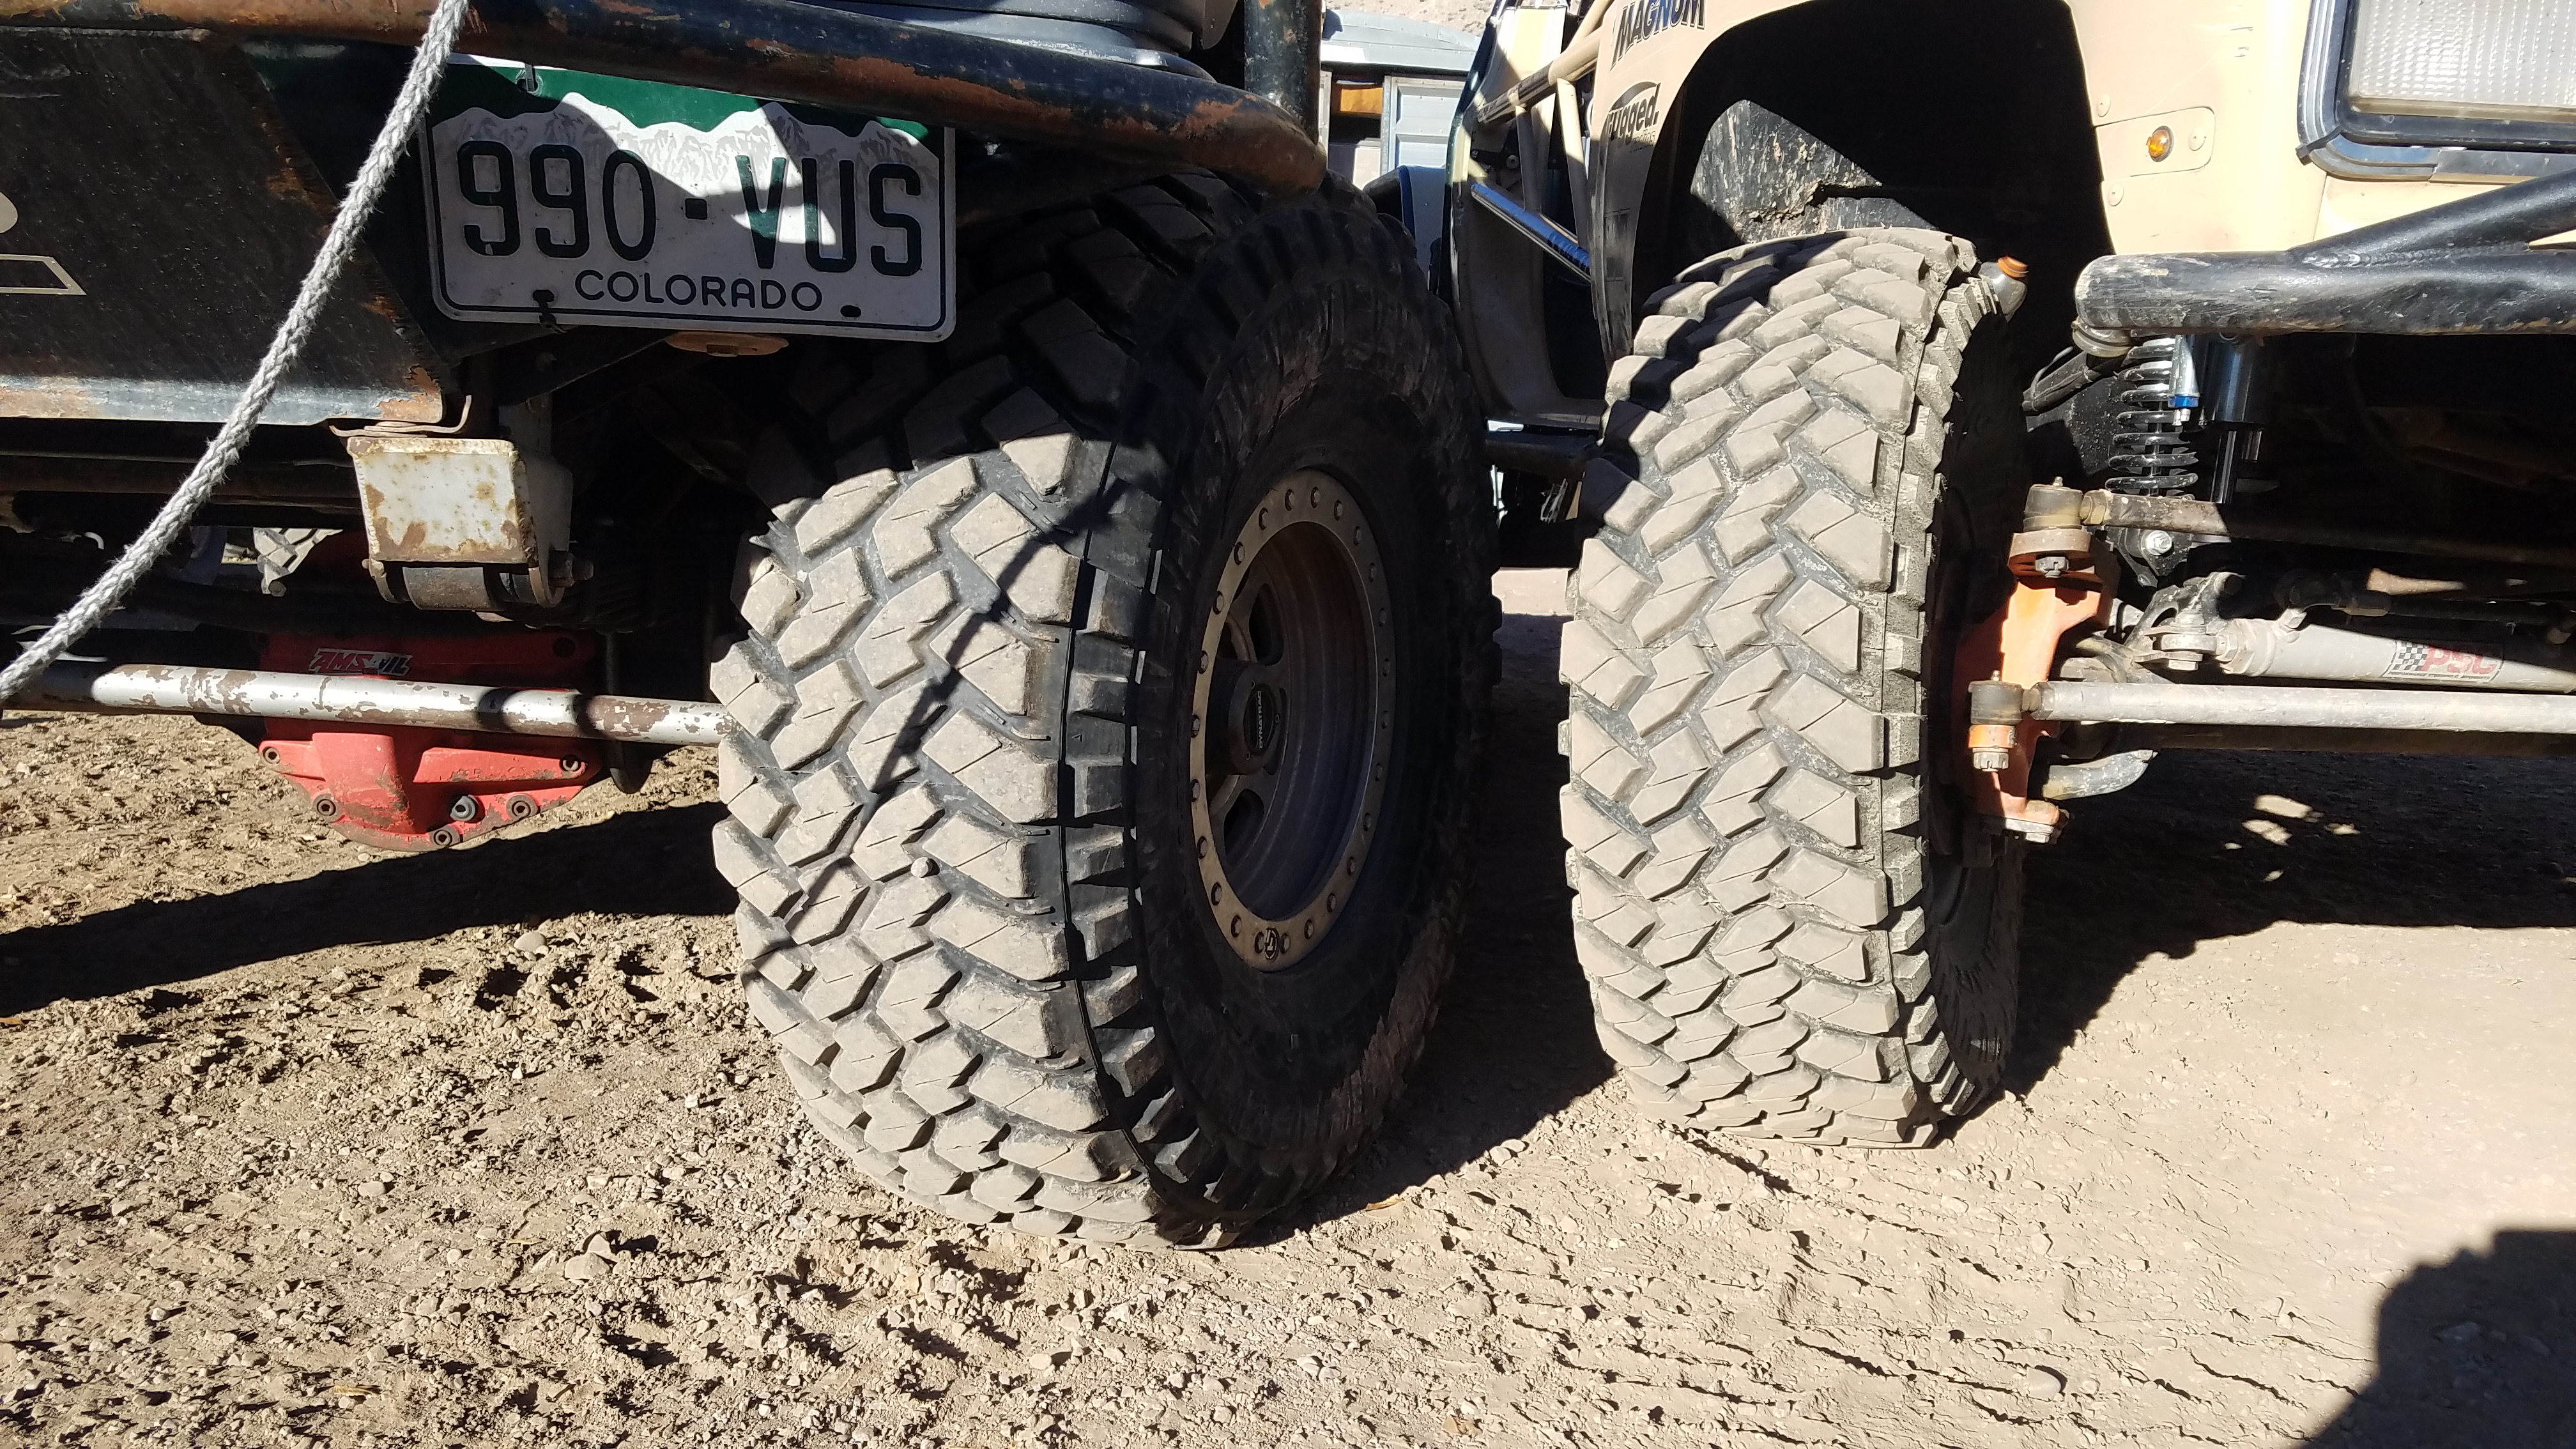 "I got some new big tires, what gears should I put in my axle?"